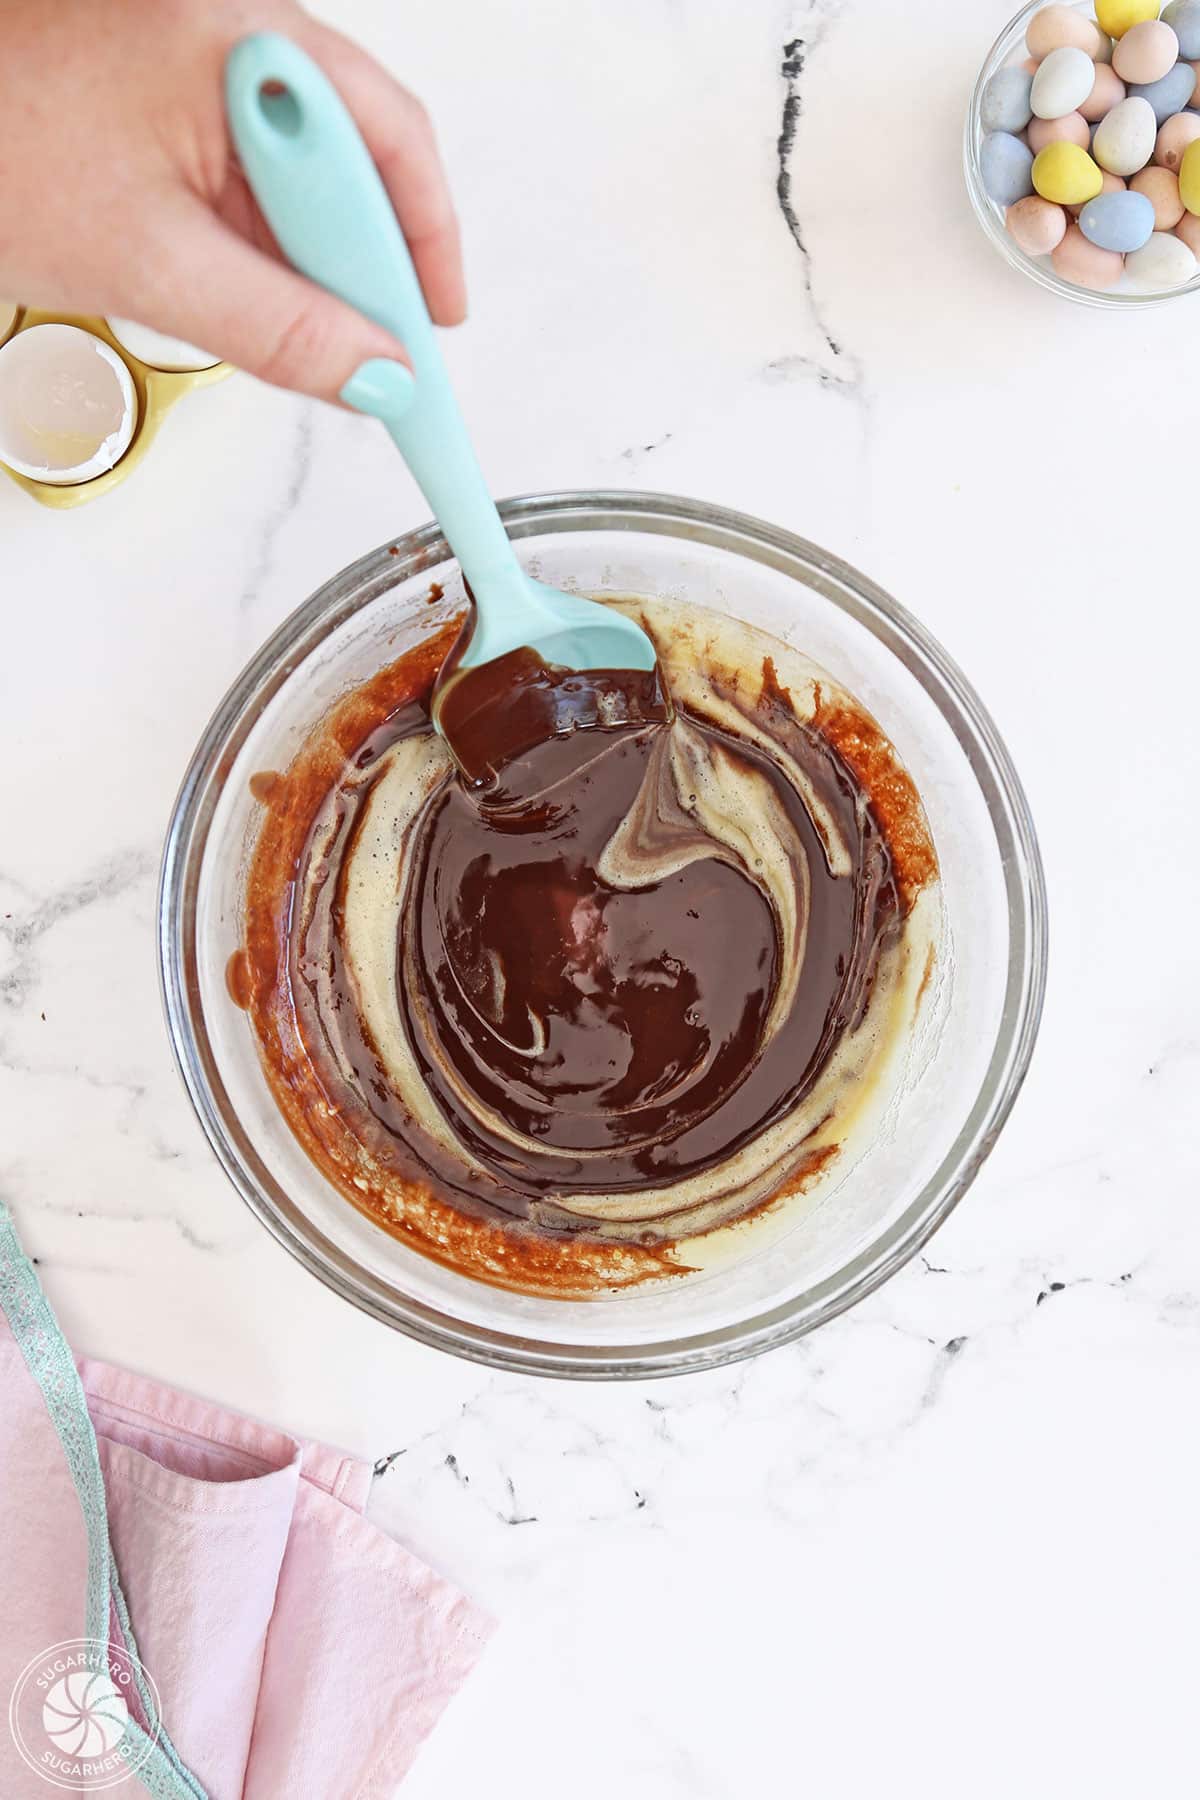 Stirring eggs and melted chocolate together.